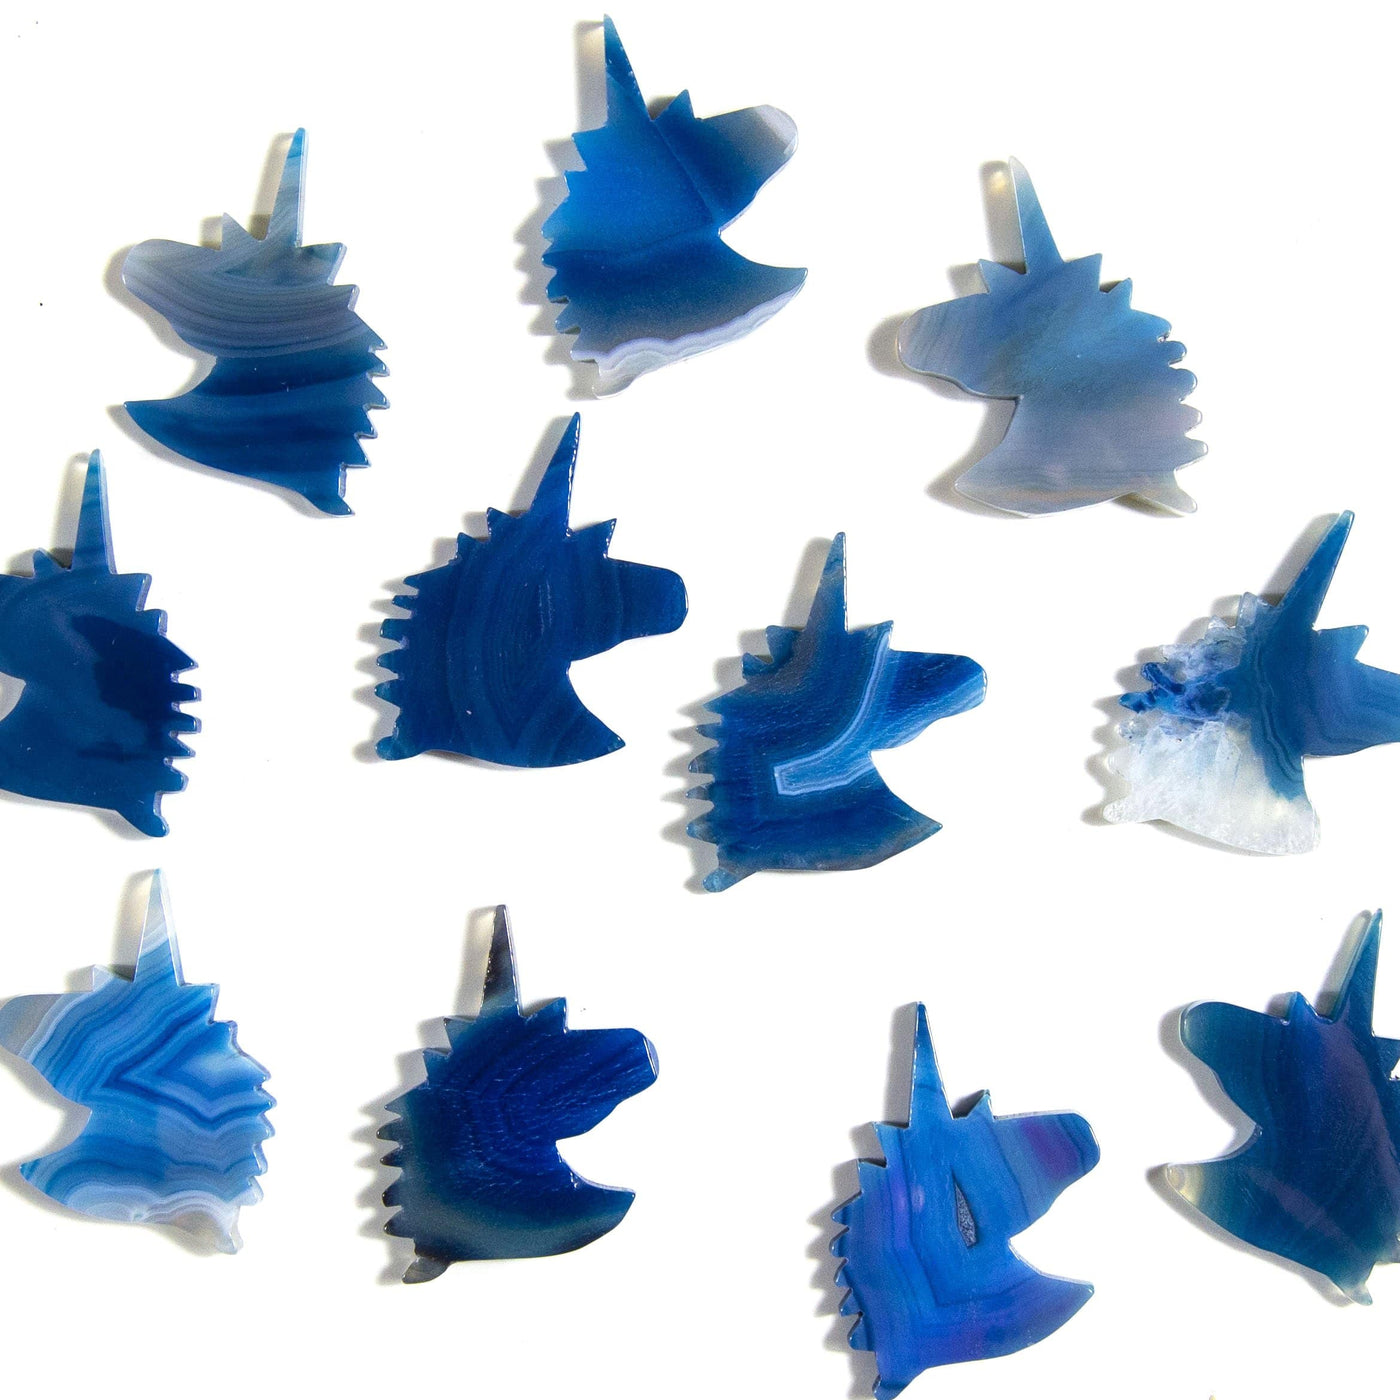 Blue agate unicorn heads being displayed on a white background.